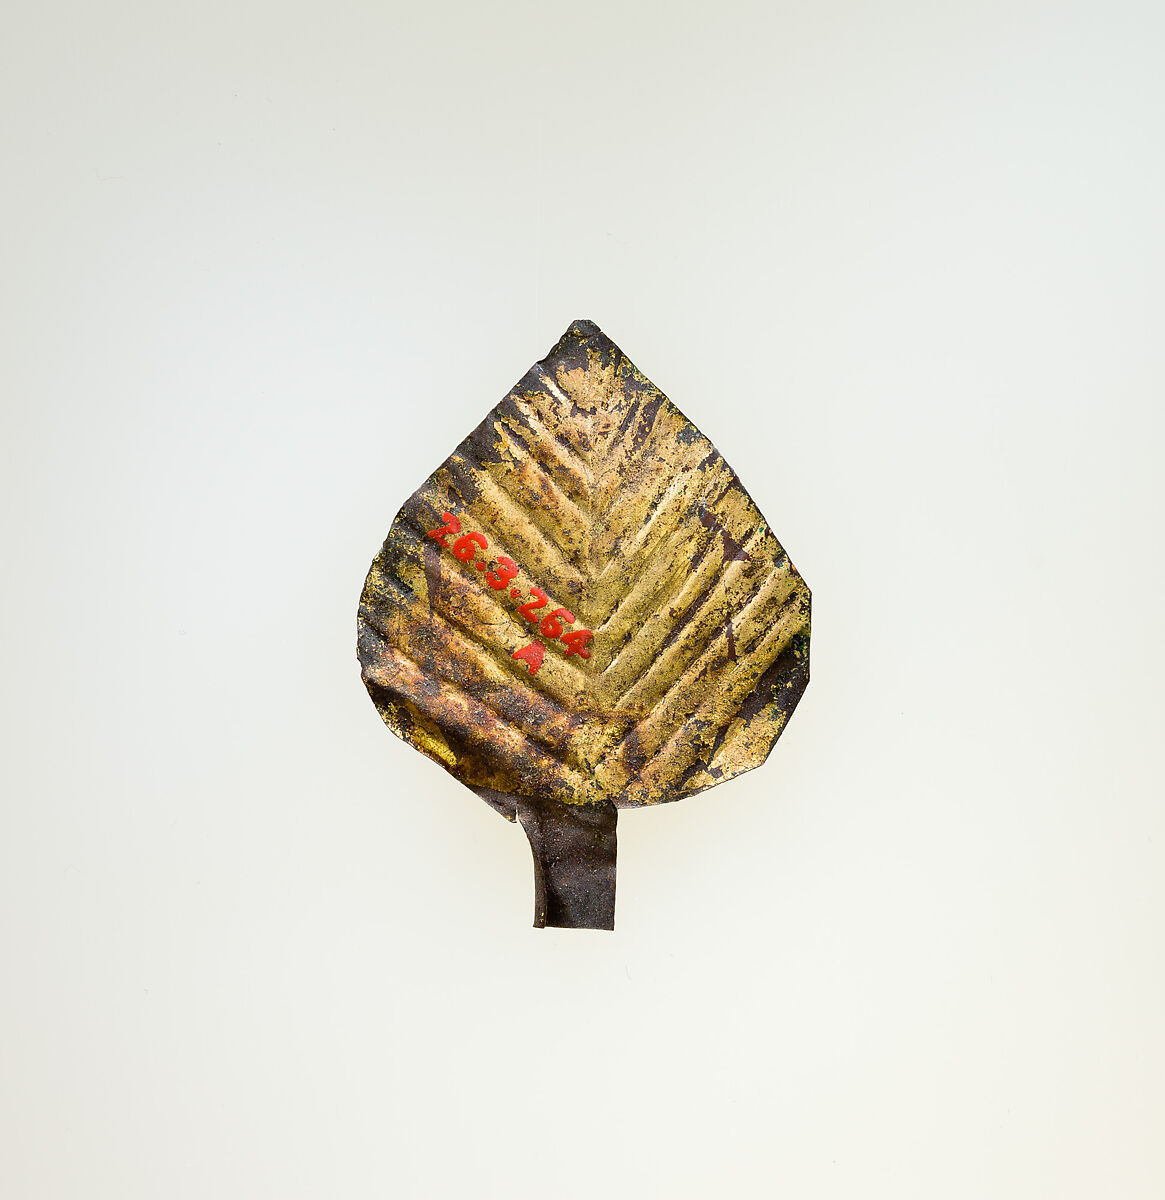 Three gilded leaves from a wreath, Copper alloy, gold 